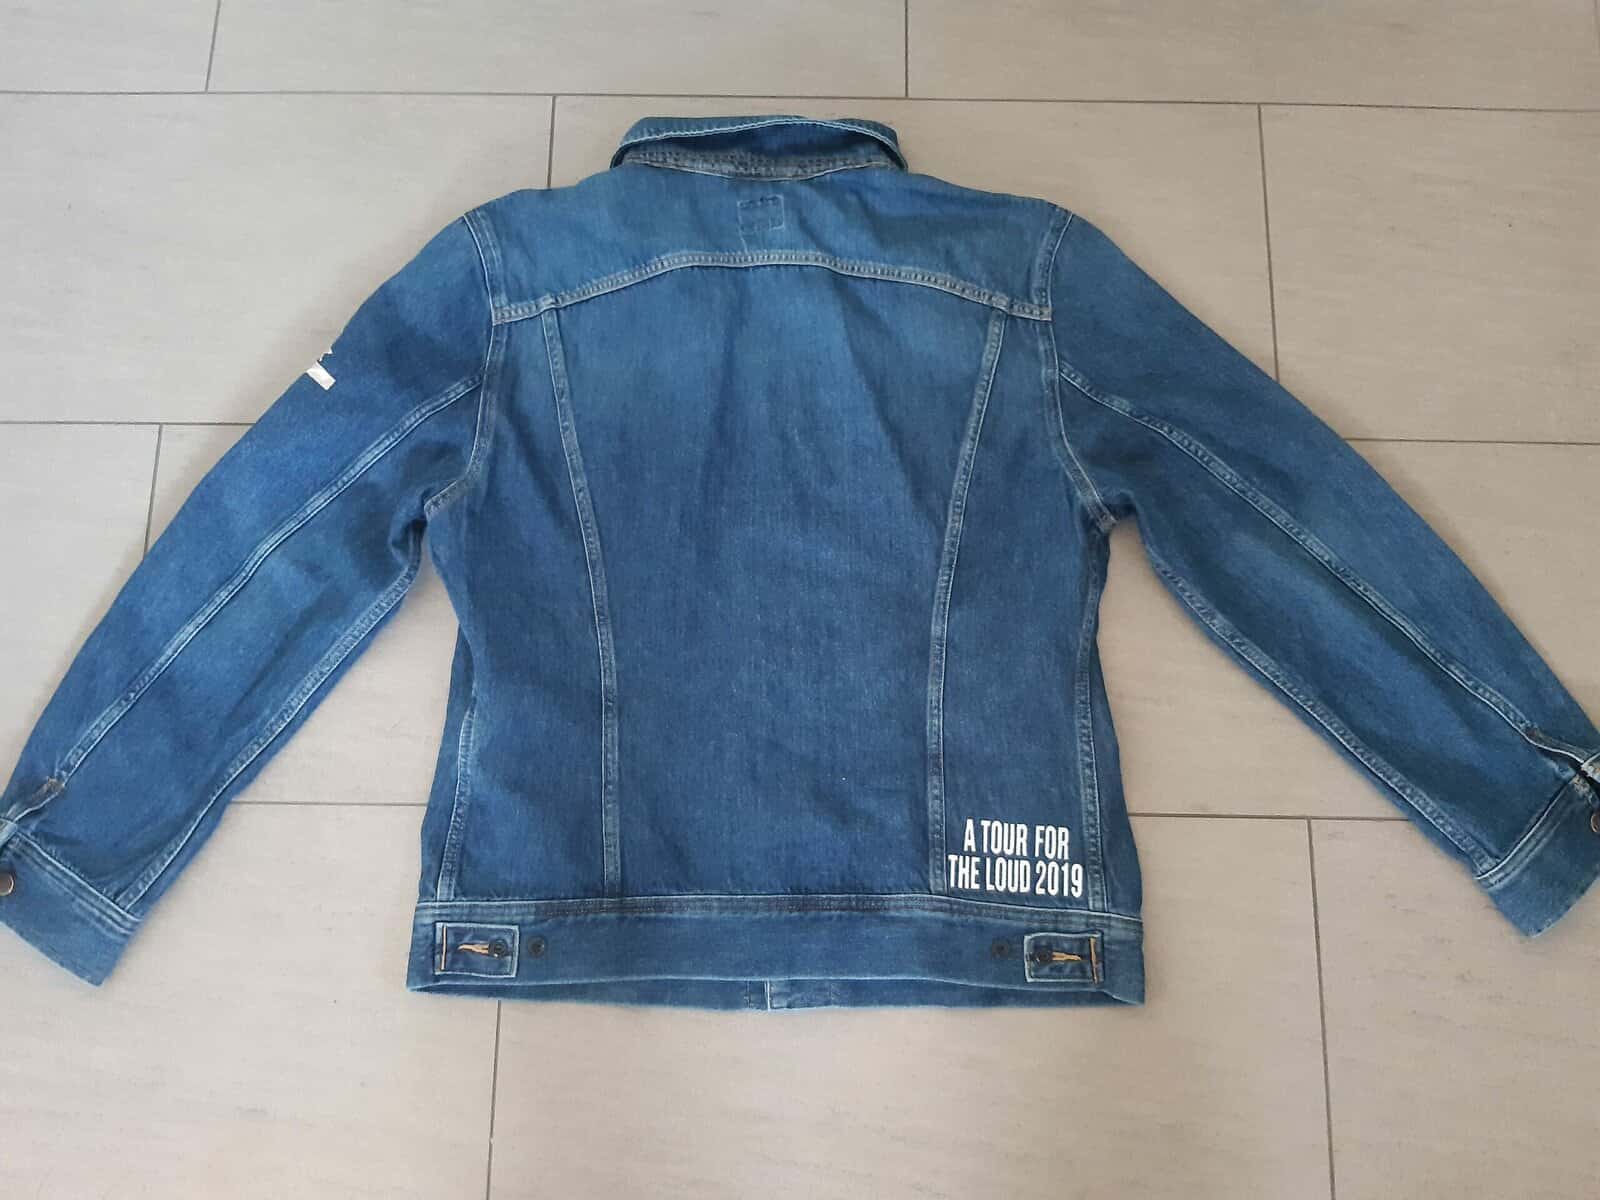 A TOUR FOR THE LOUD 2019 JACKET, BACK